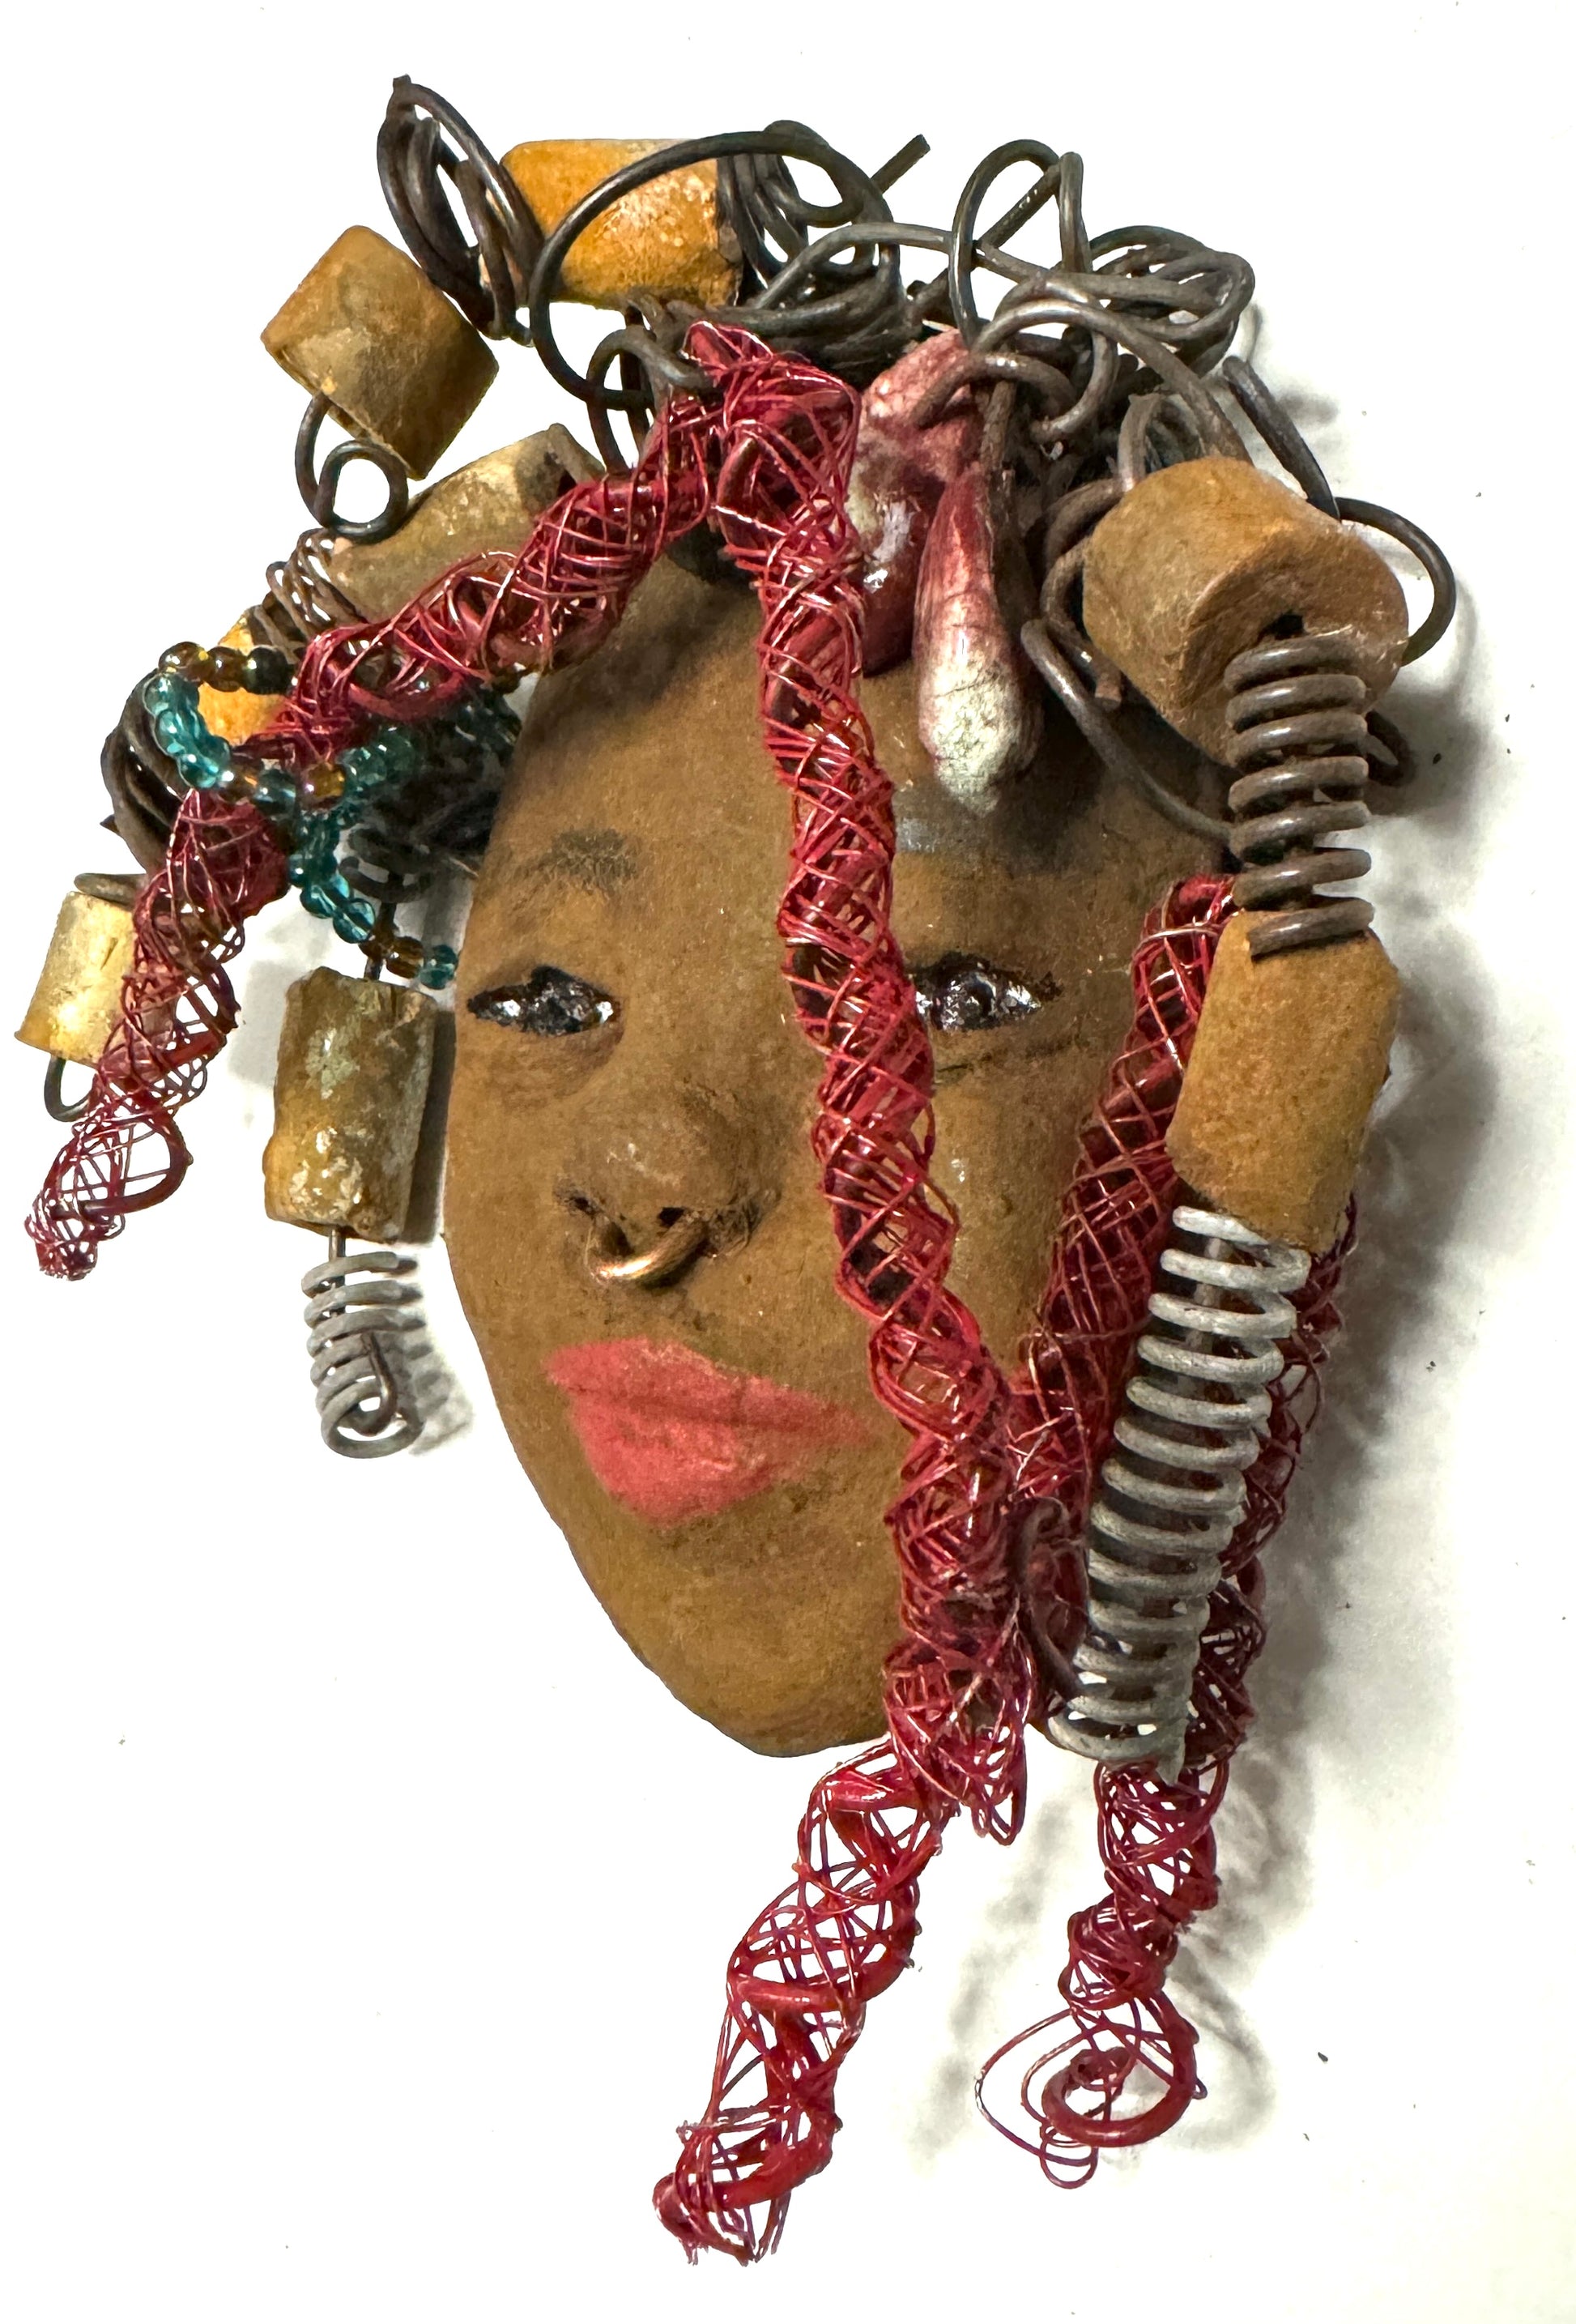 At 5" x 6" in size, Ola makes a stunning addition to walls, trees, and shadow boxes. His signature red braided hair is ornamented with handcrafted Raku beads, while his skin has a warm honey brown hue. Each piece is equipped with over 20 feet of top-notch 16 & 24-gauge wire in the hair. This fashionable sculpture will bring a modern flair to any room - simply place it in a shadow box and enjoy!  